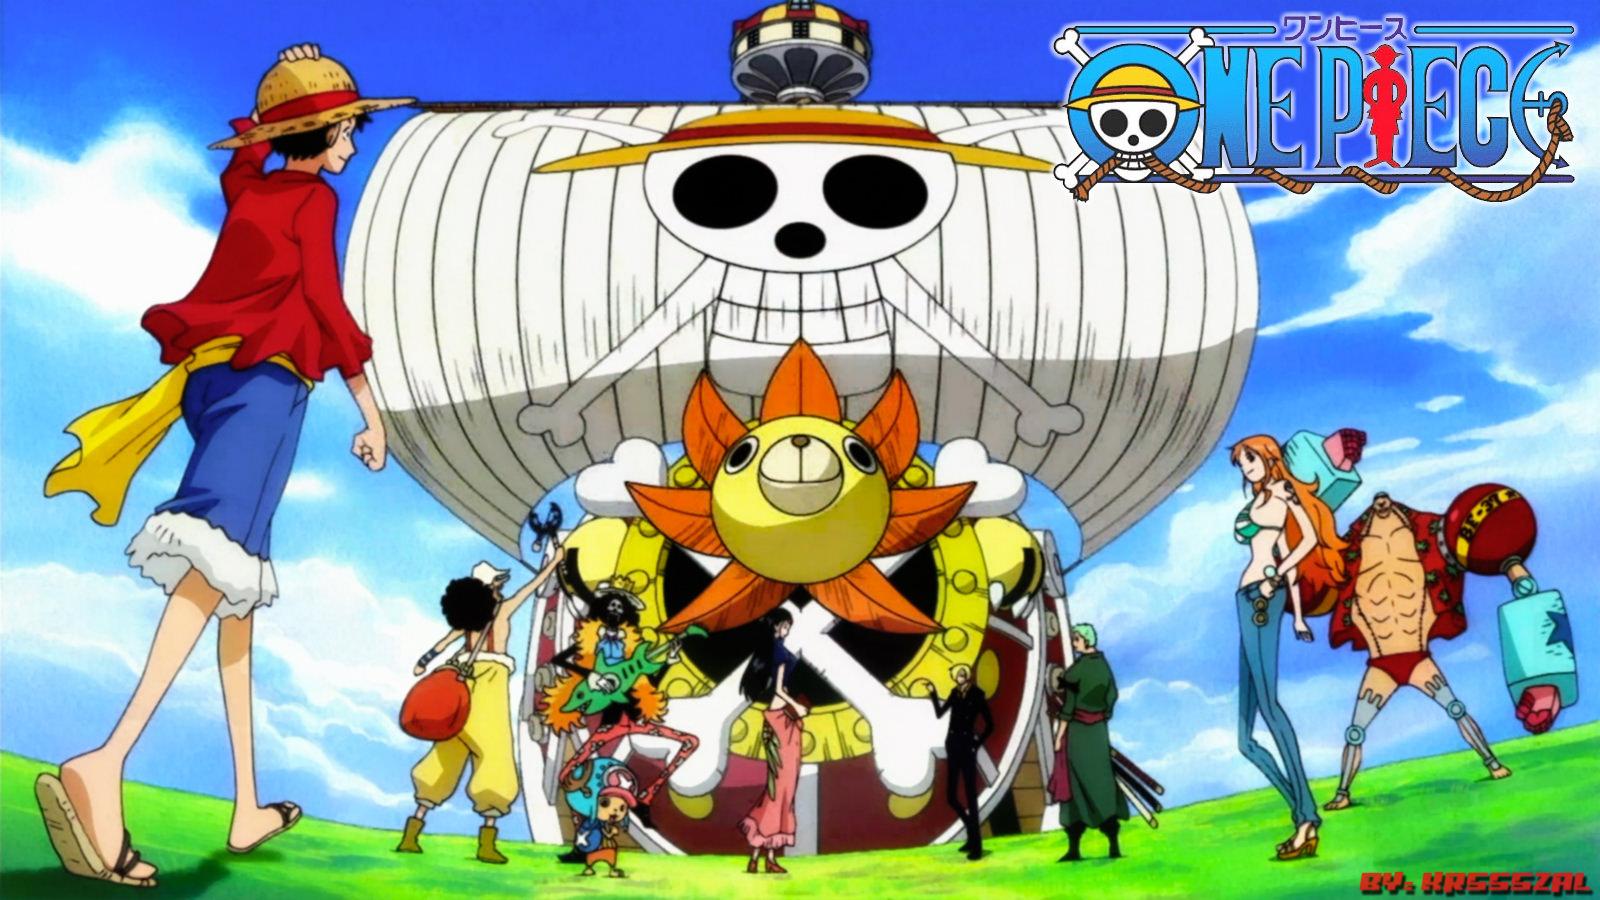 one piece wallpapers hd: One Piece Wallpapers Thousand Sunny View HD.